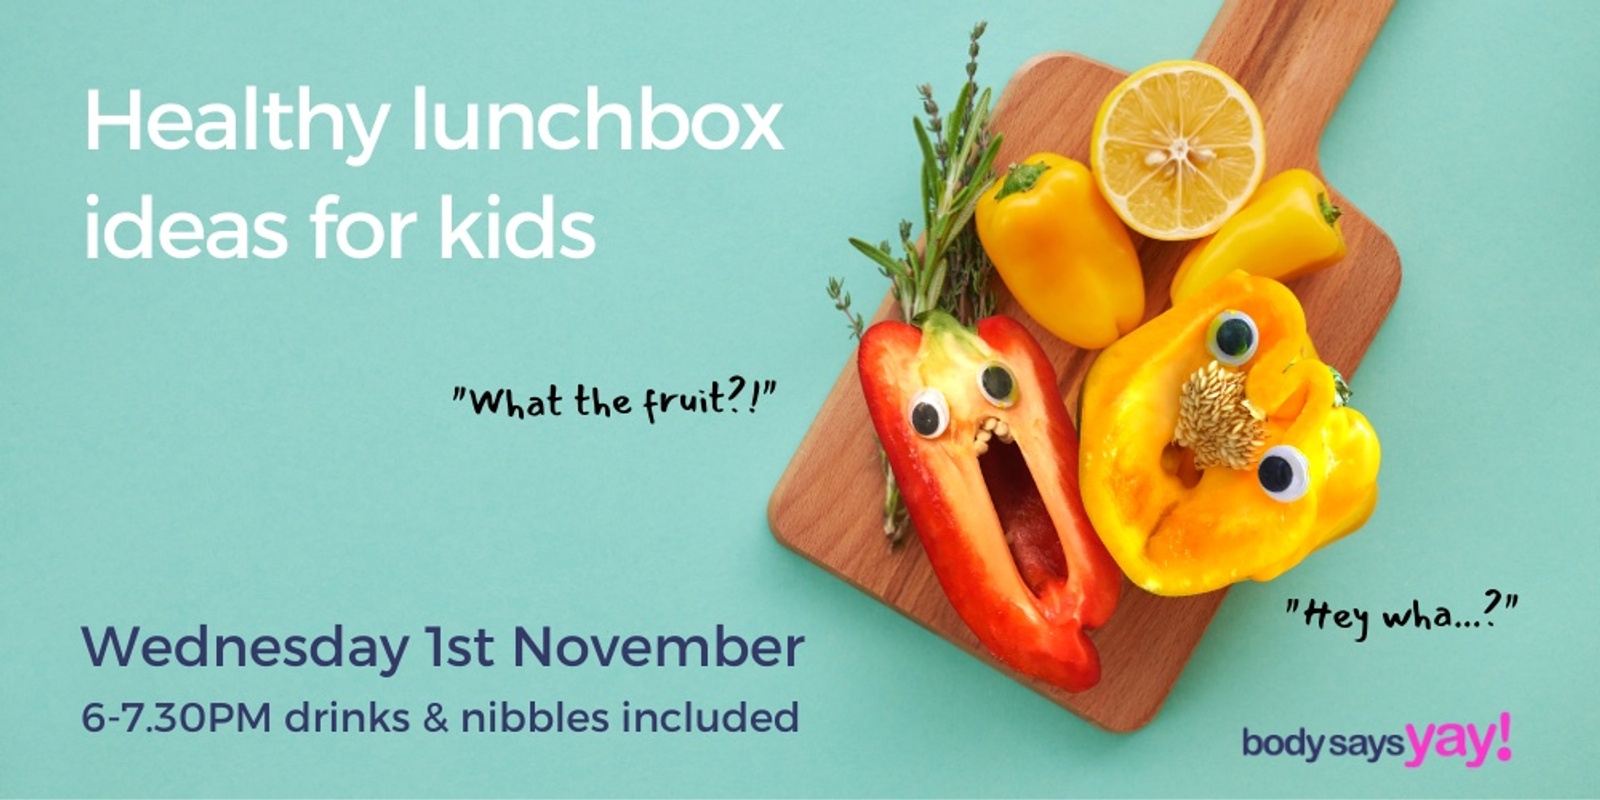 Banner image for Healthy lunchbox ideas for kids